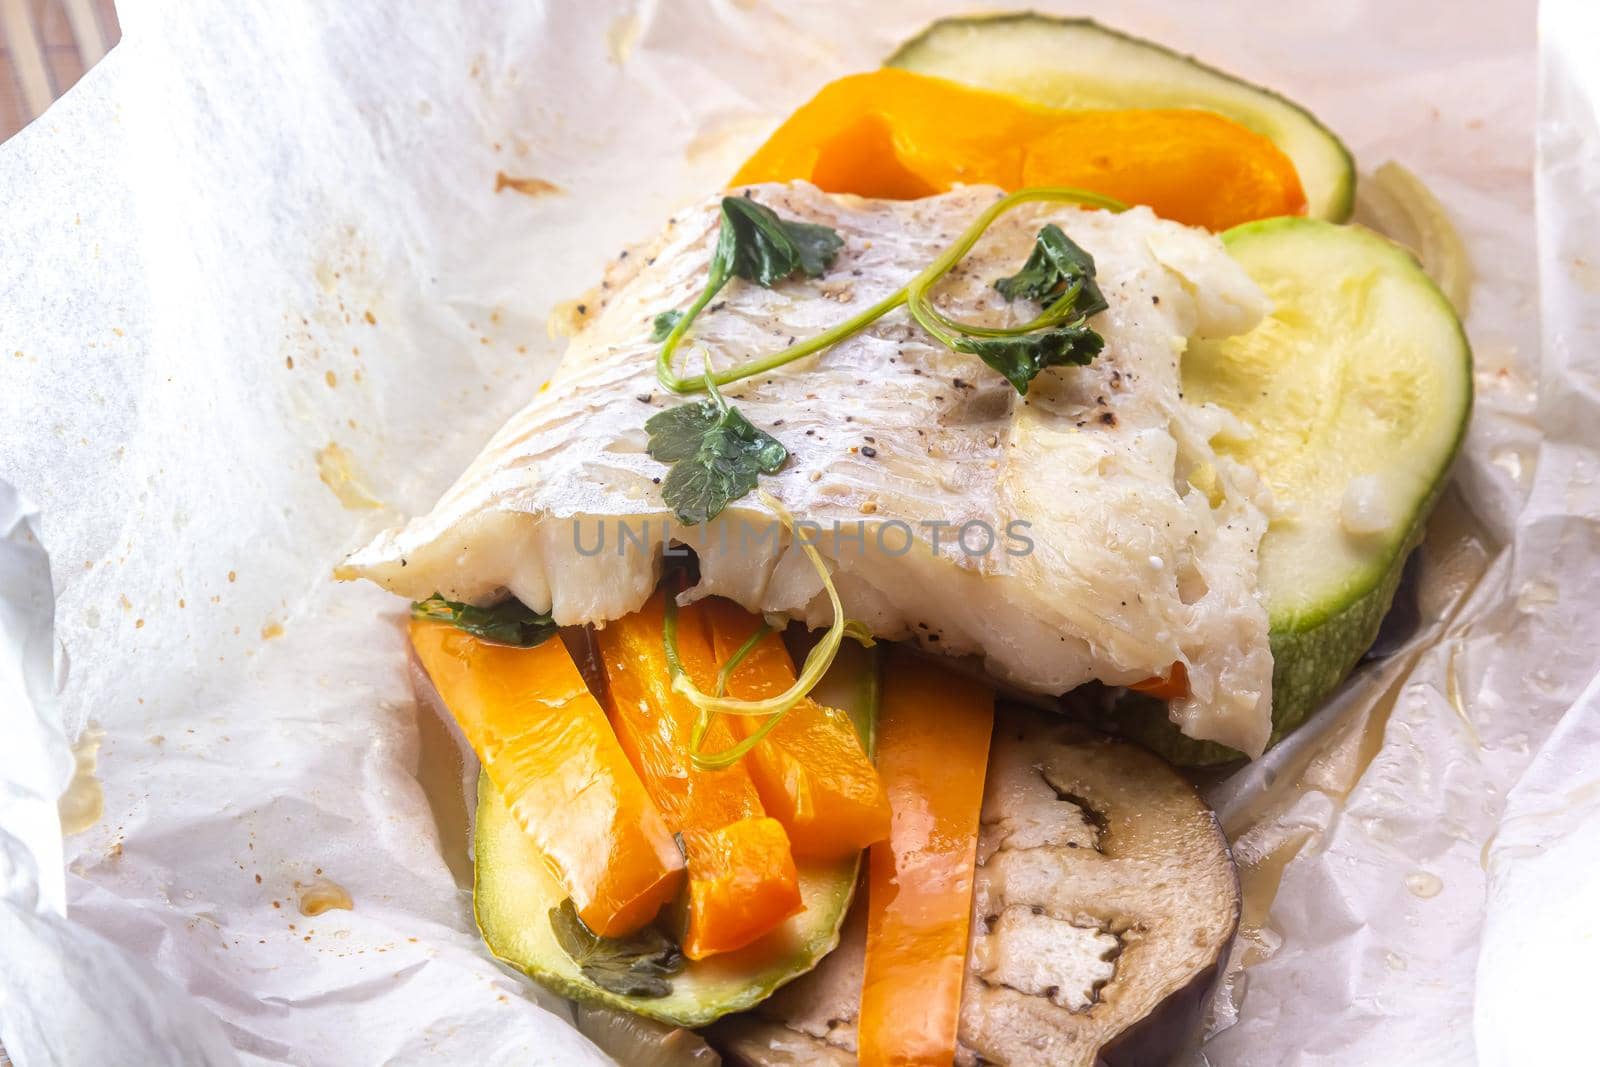 White fish fillet with vegetables in rustic style. Healthy eating: cooked fish fillet with vegetables garnish. Diet food with white fish and vegetables. Steam vegetables with roasted zander fillet.